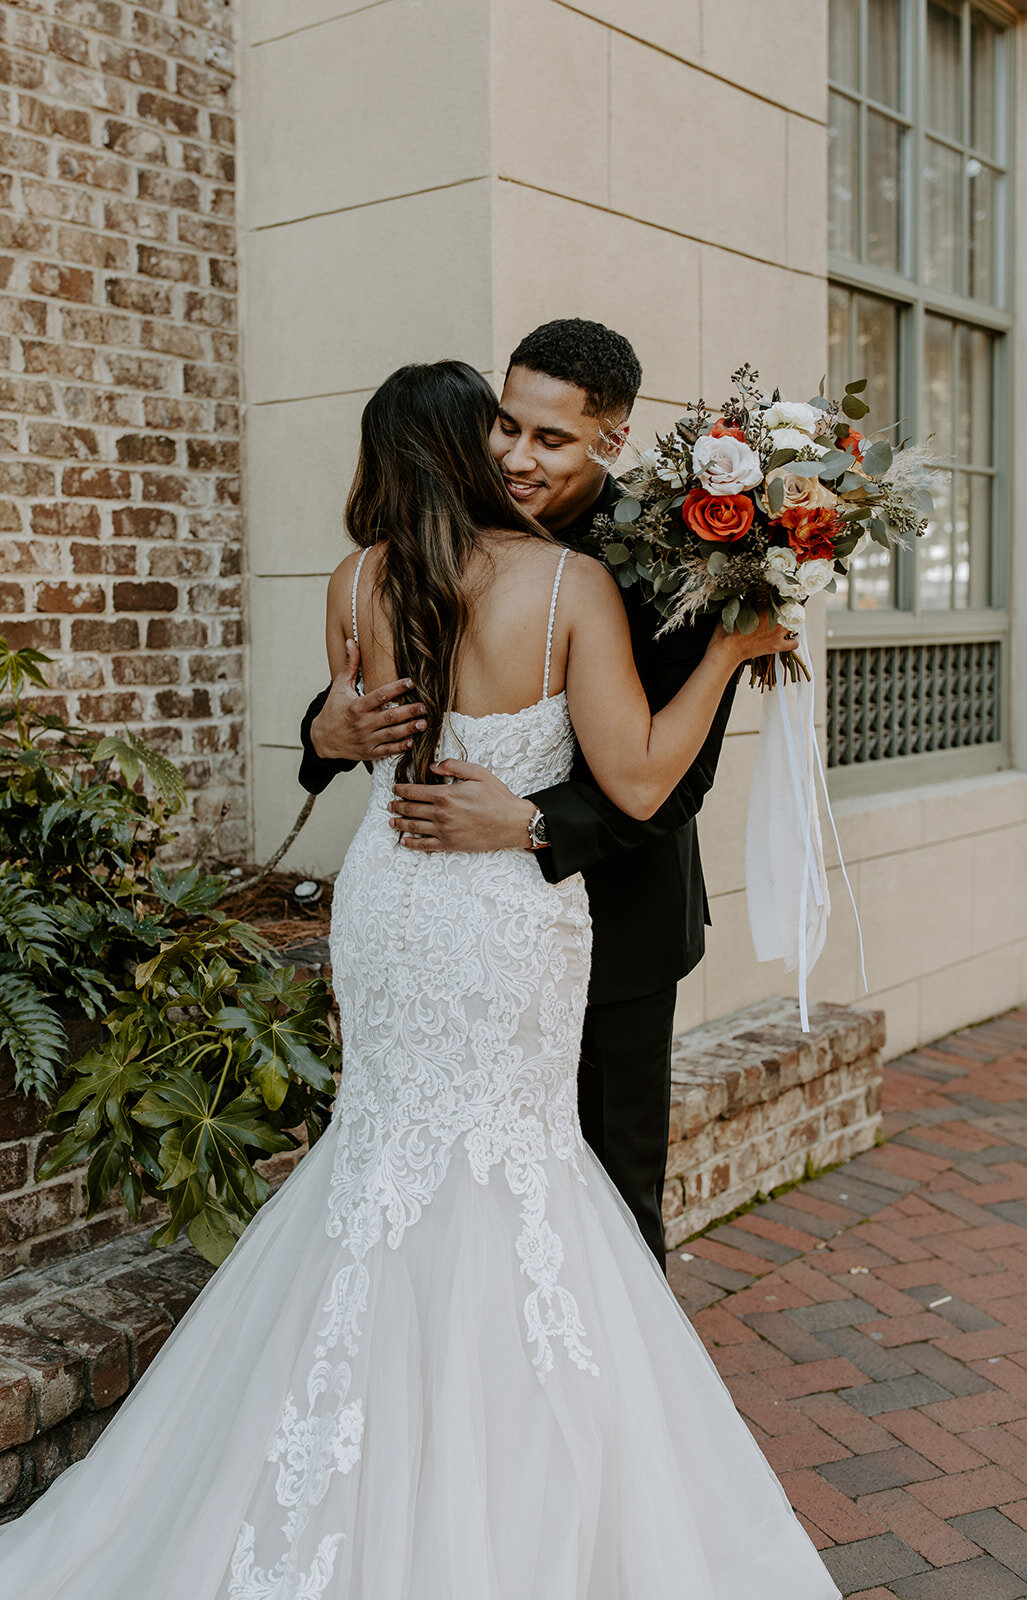 ivory-and-beau-bride-and-florals-jessica-and-ian-savannah-wedding-the-clyde-venue-boho-wedding-boho-bride-wedding-blog-maggie-sottero-wedding-dress-real-wedding-real-bride-1B8A0970.jpg